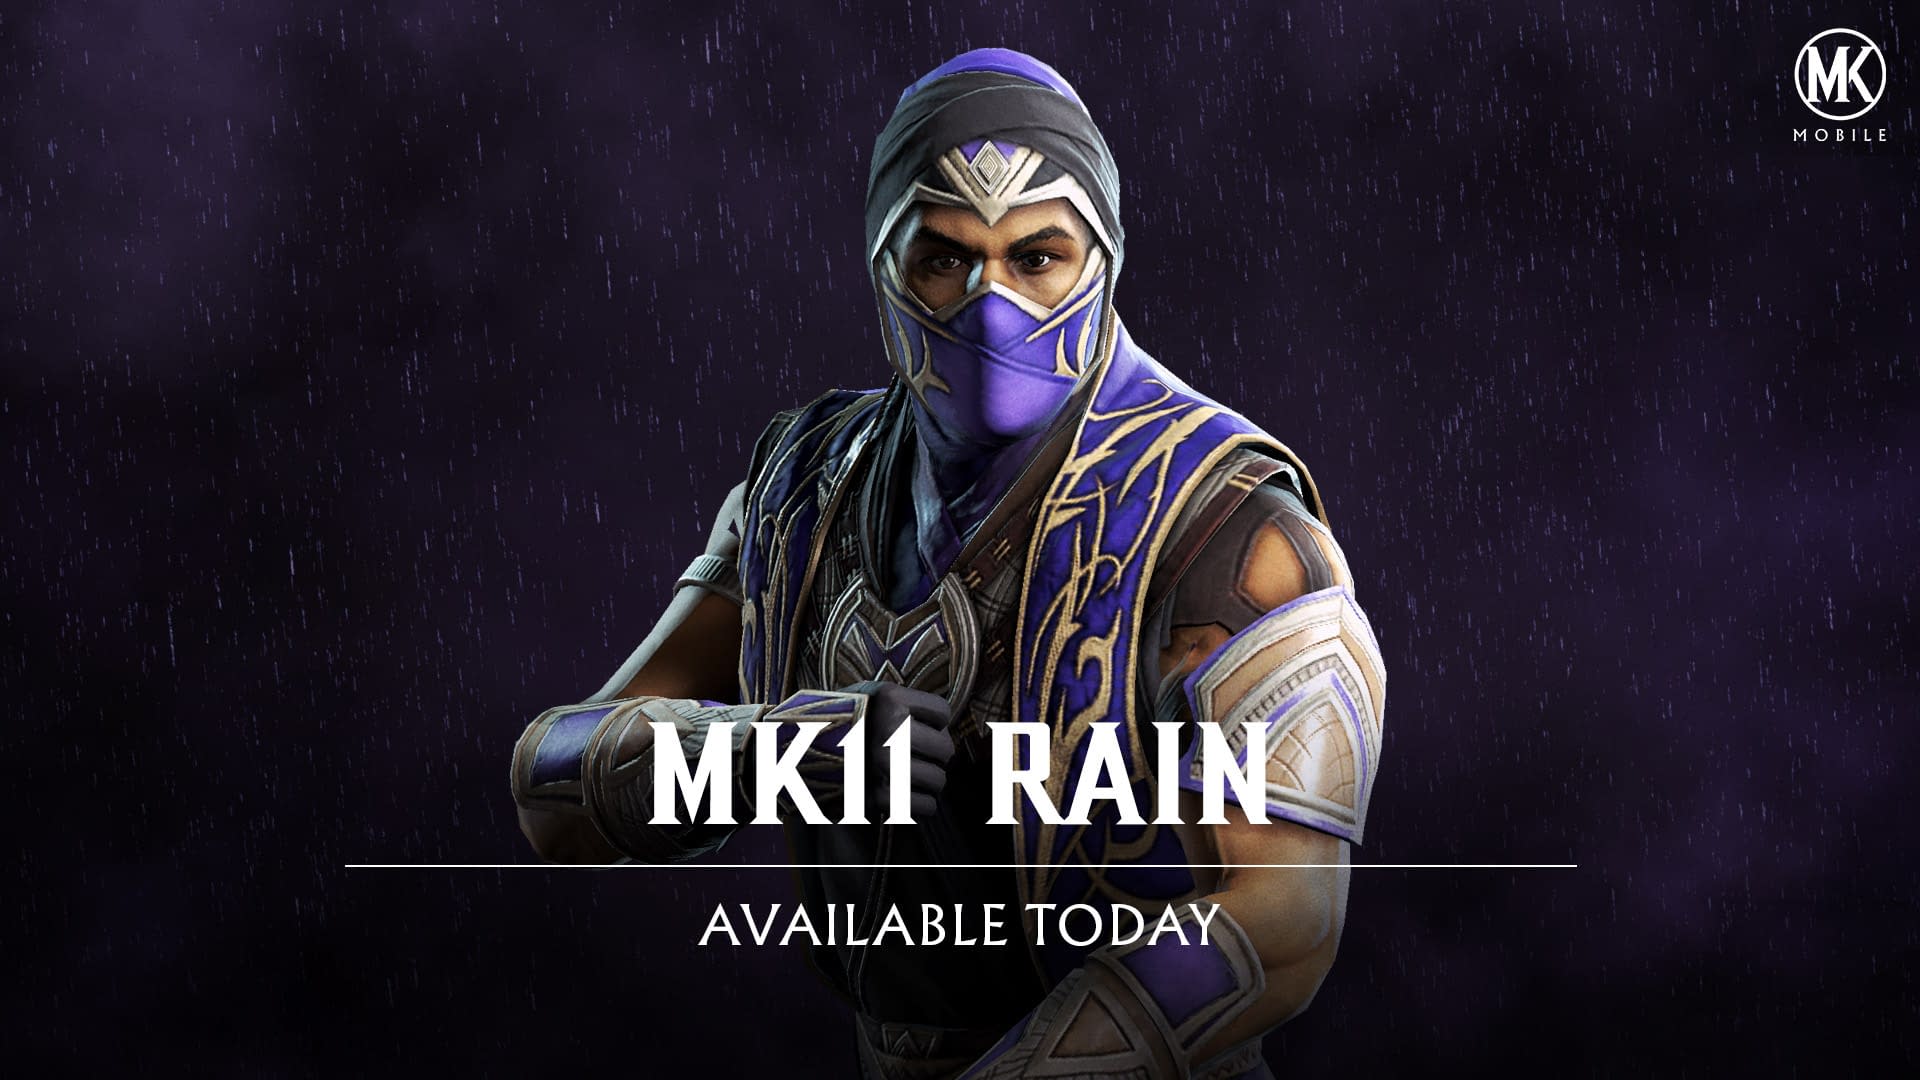 Mortal Kombat X now available on iOS; Android version coming soon